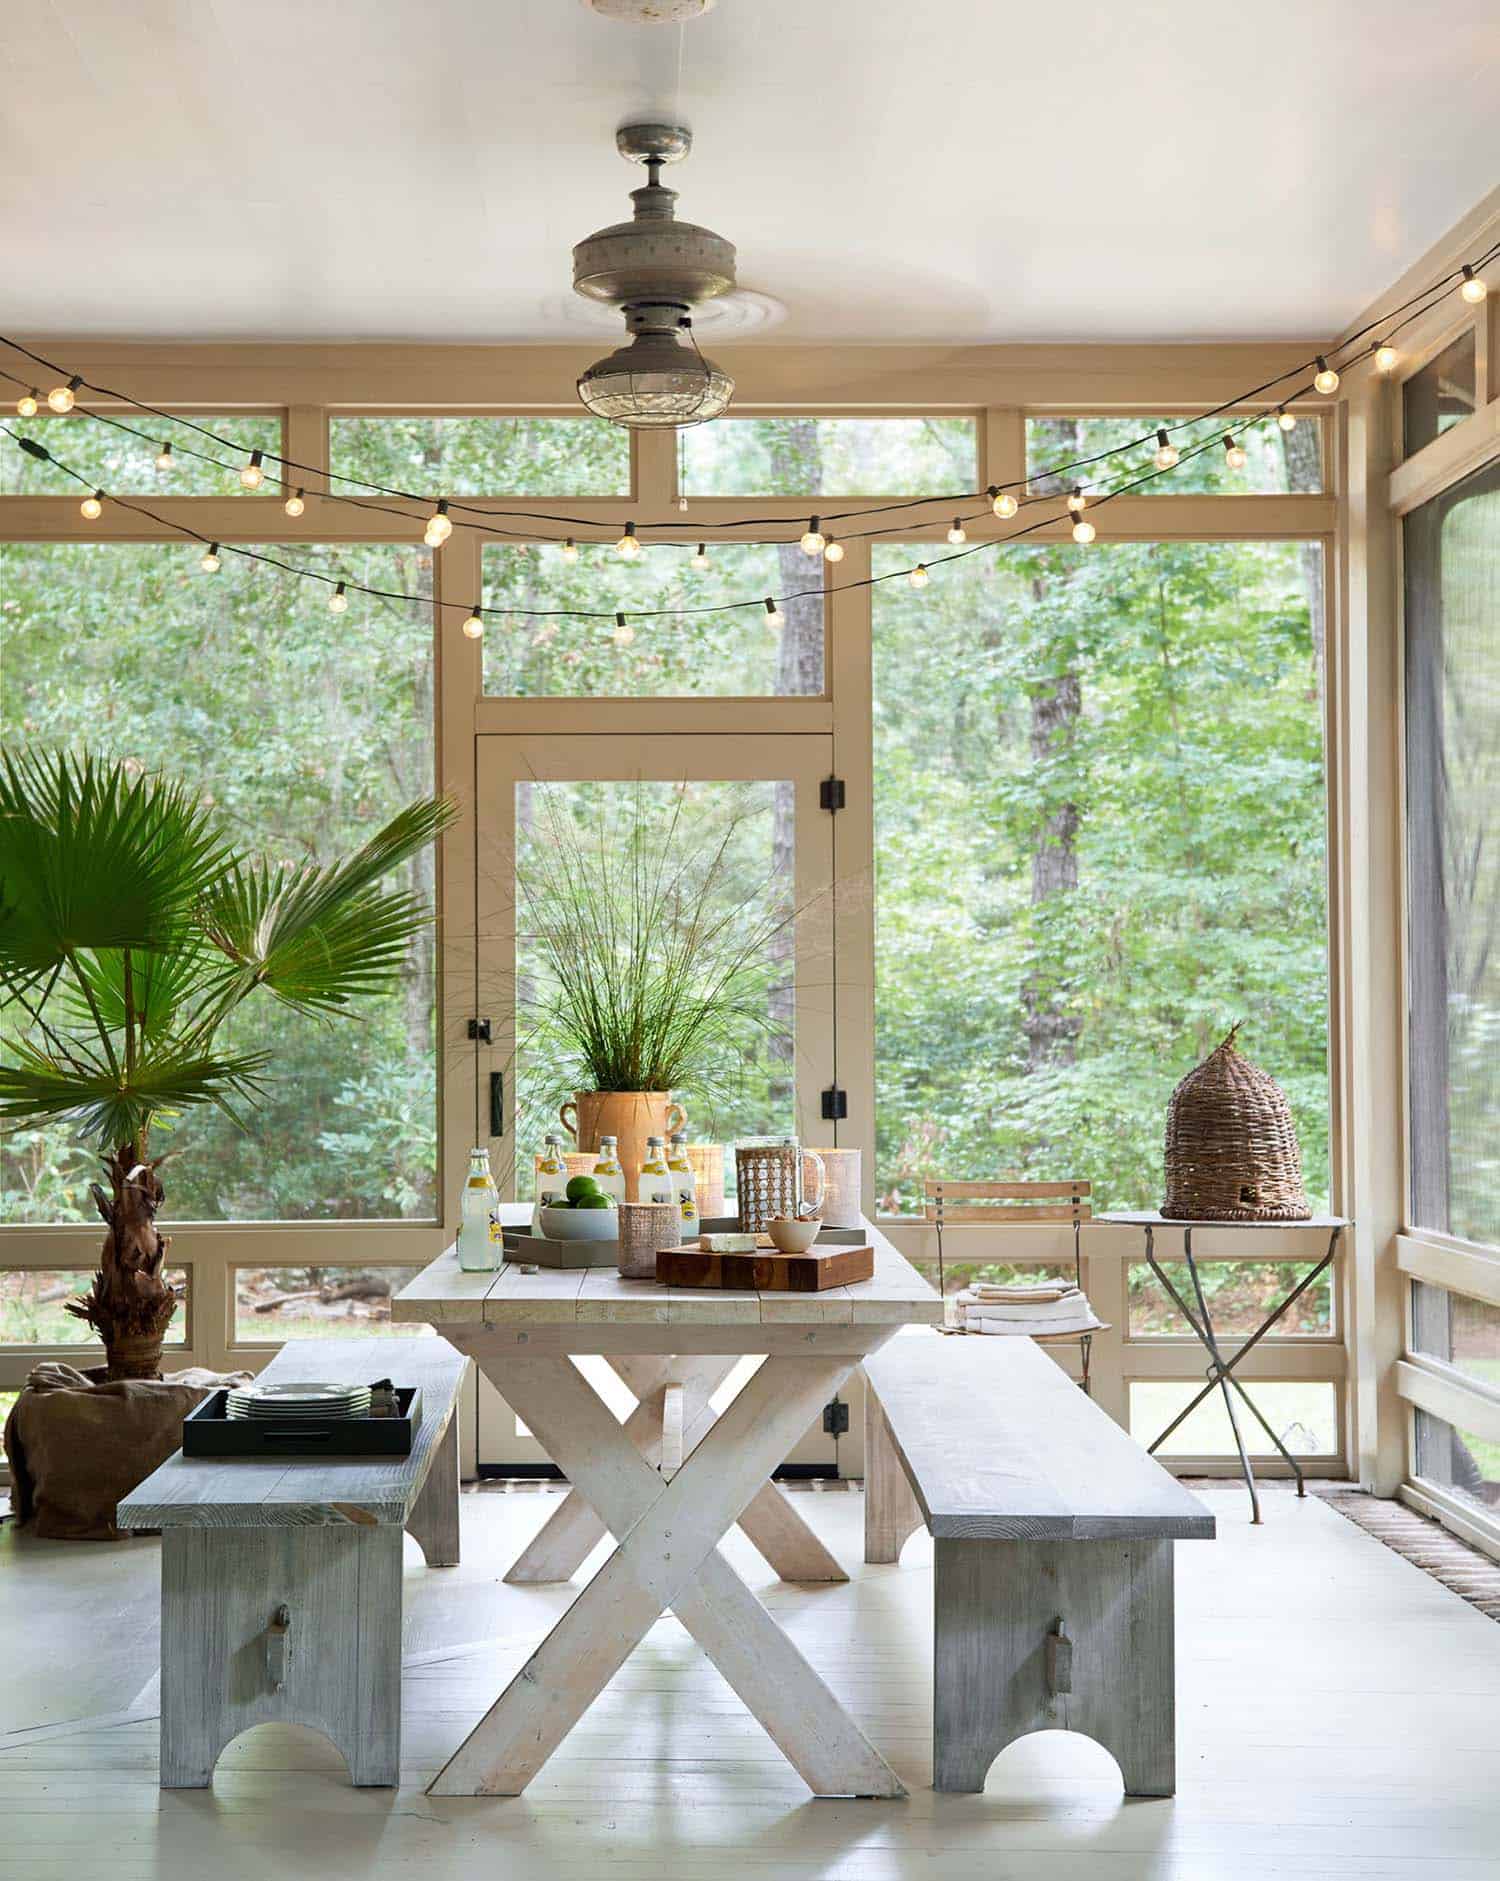 45 Amazingly Cozy And Relaxing Screened Porch Design Ideas - How To Decorate Screened In Patio